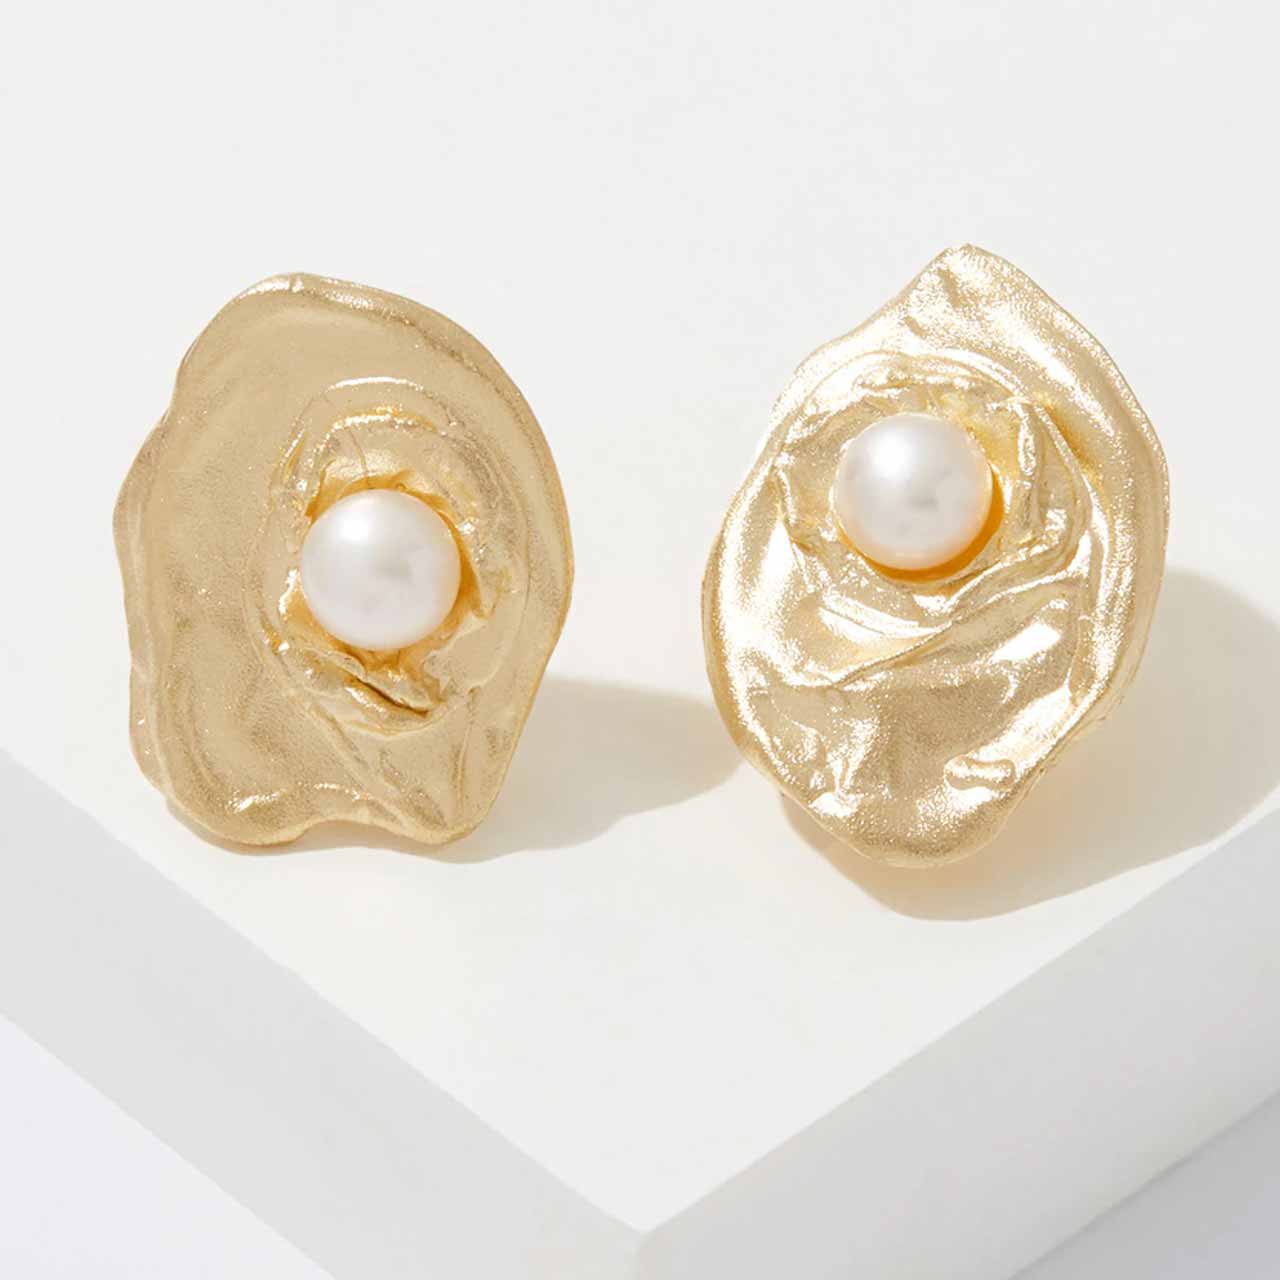 Primal Gold 14 Karat Yellow Gold 5-6mm White Button Freshwater Cultured Pearl  Post Earrings - Walmart.com